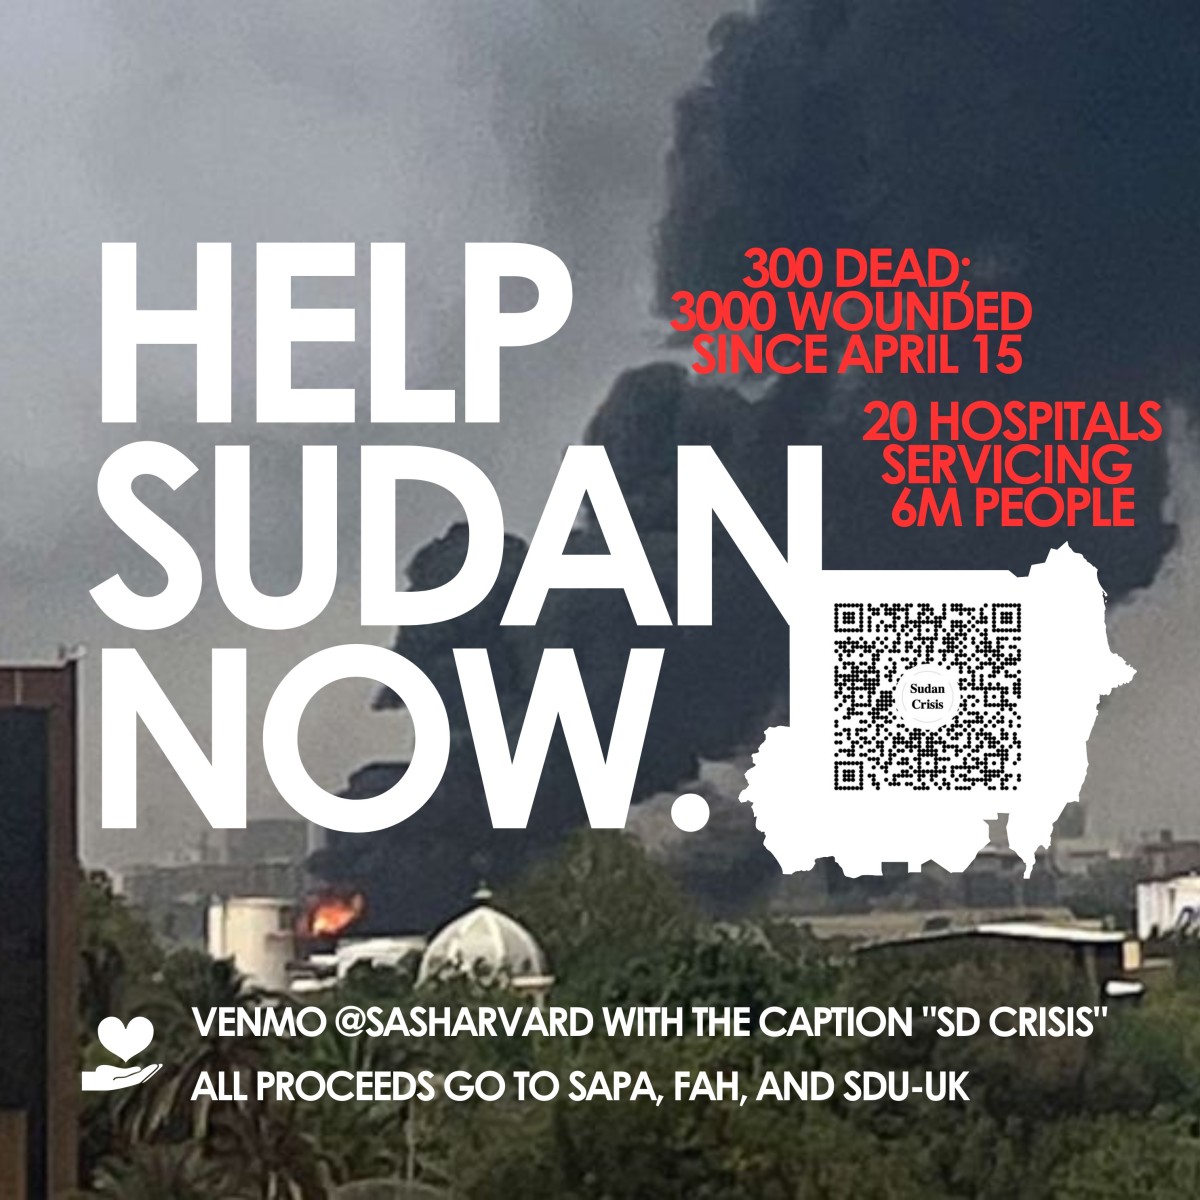 Image of a city on fire, with text that reads: HELP SUDAN NOW. 300 dead; 3000 wounded since April 15. 20 hospitals servicing 6 million people. Venmo @Sasharvard with the caption 